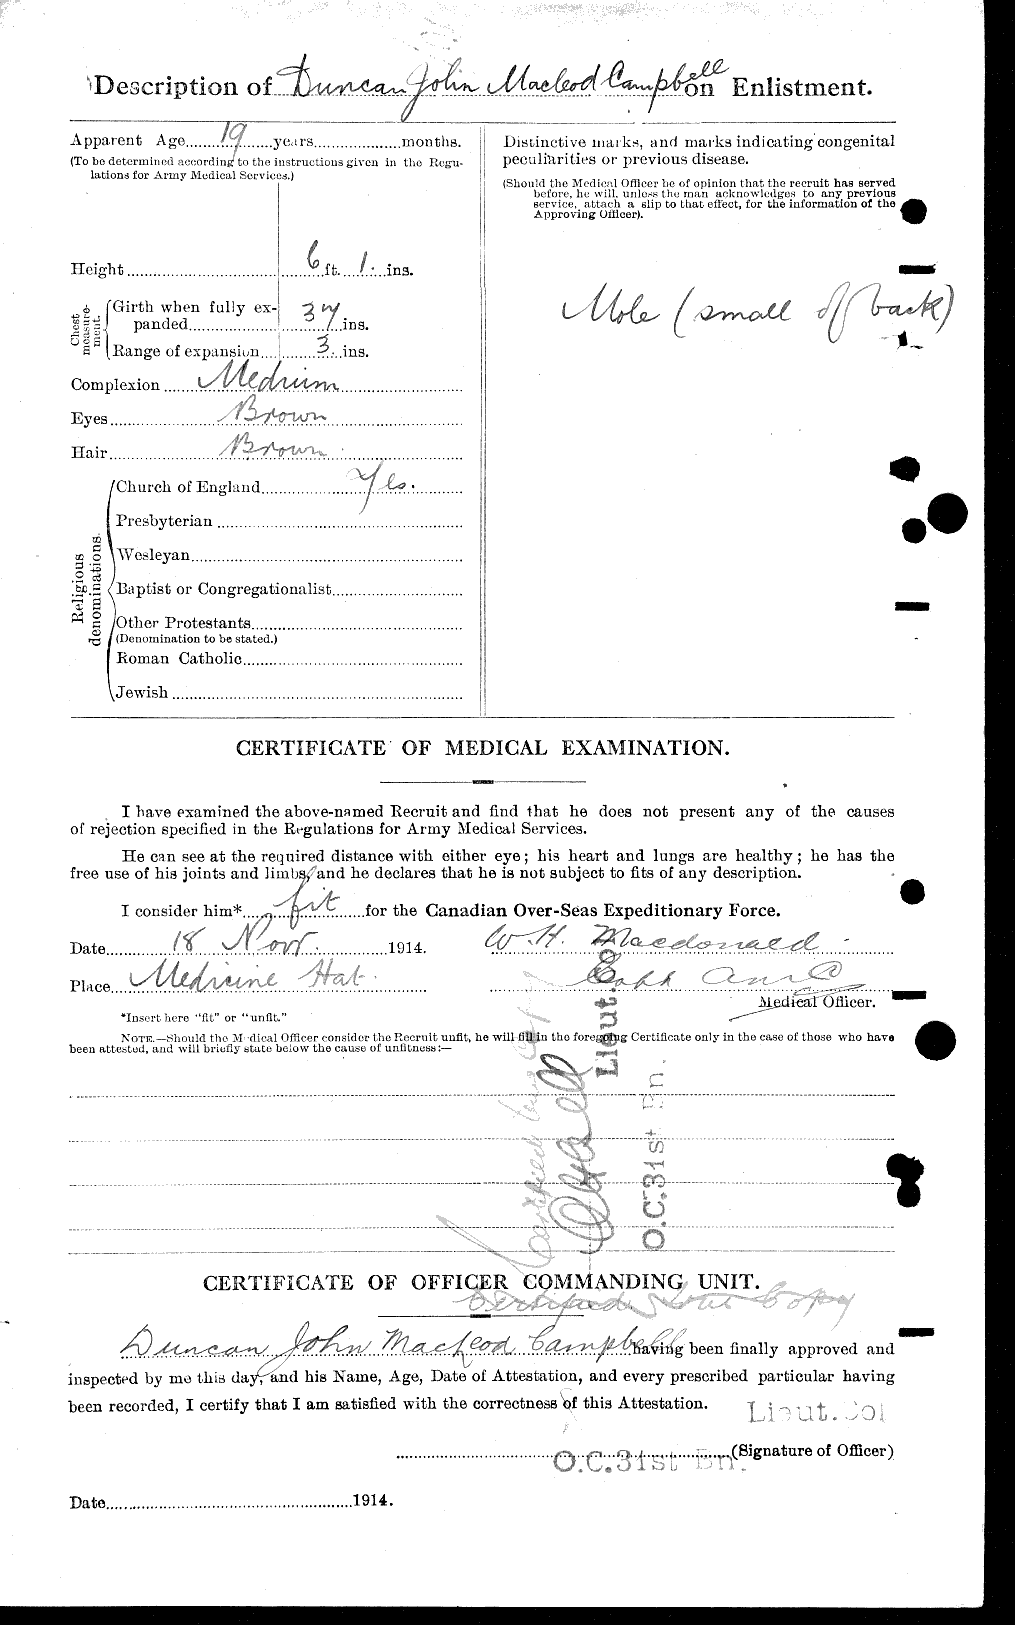 Personnel Records of the First World War - CEF 008222b